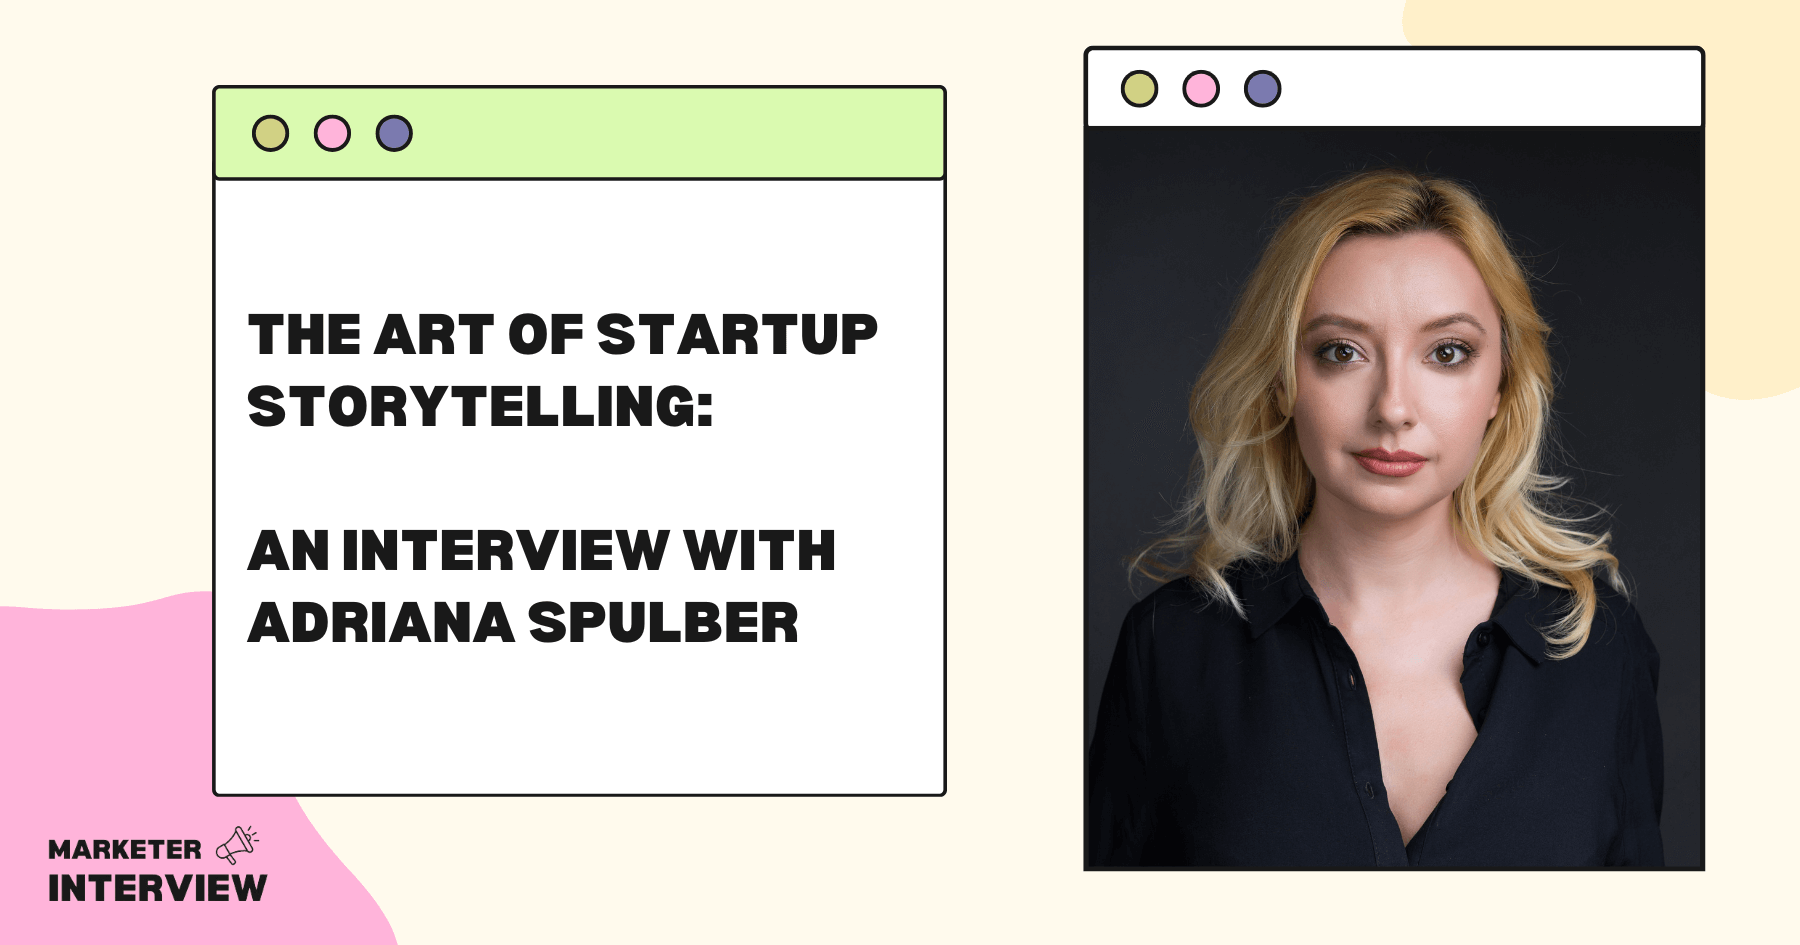 The Art of Startup Storytelling: An Interview with Adriana Spulber